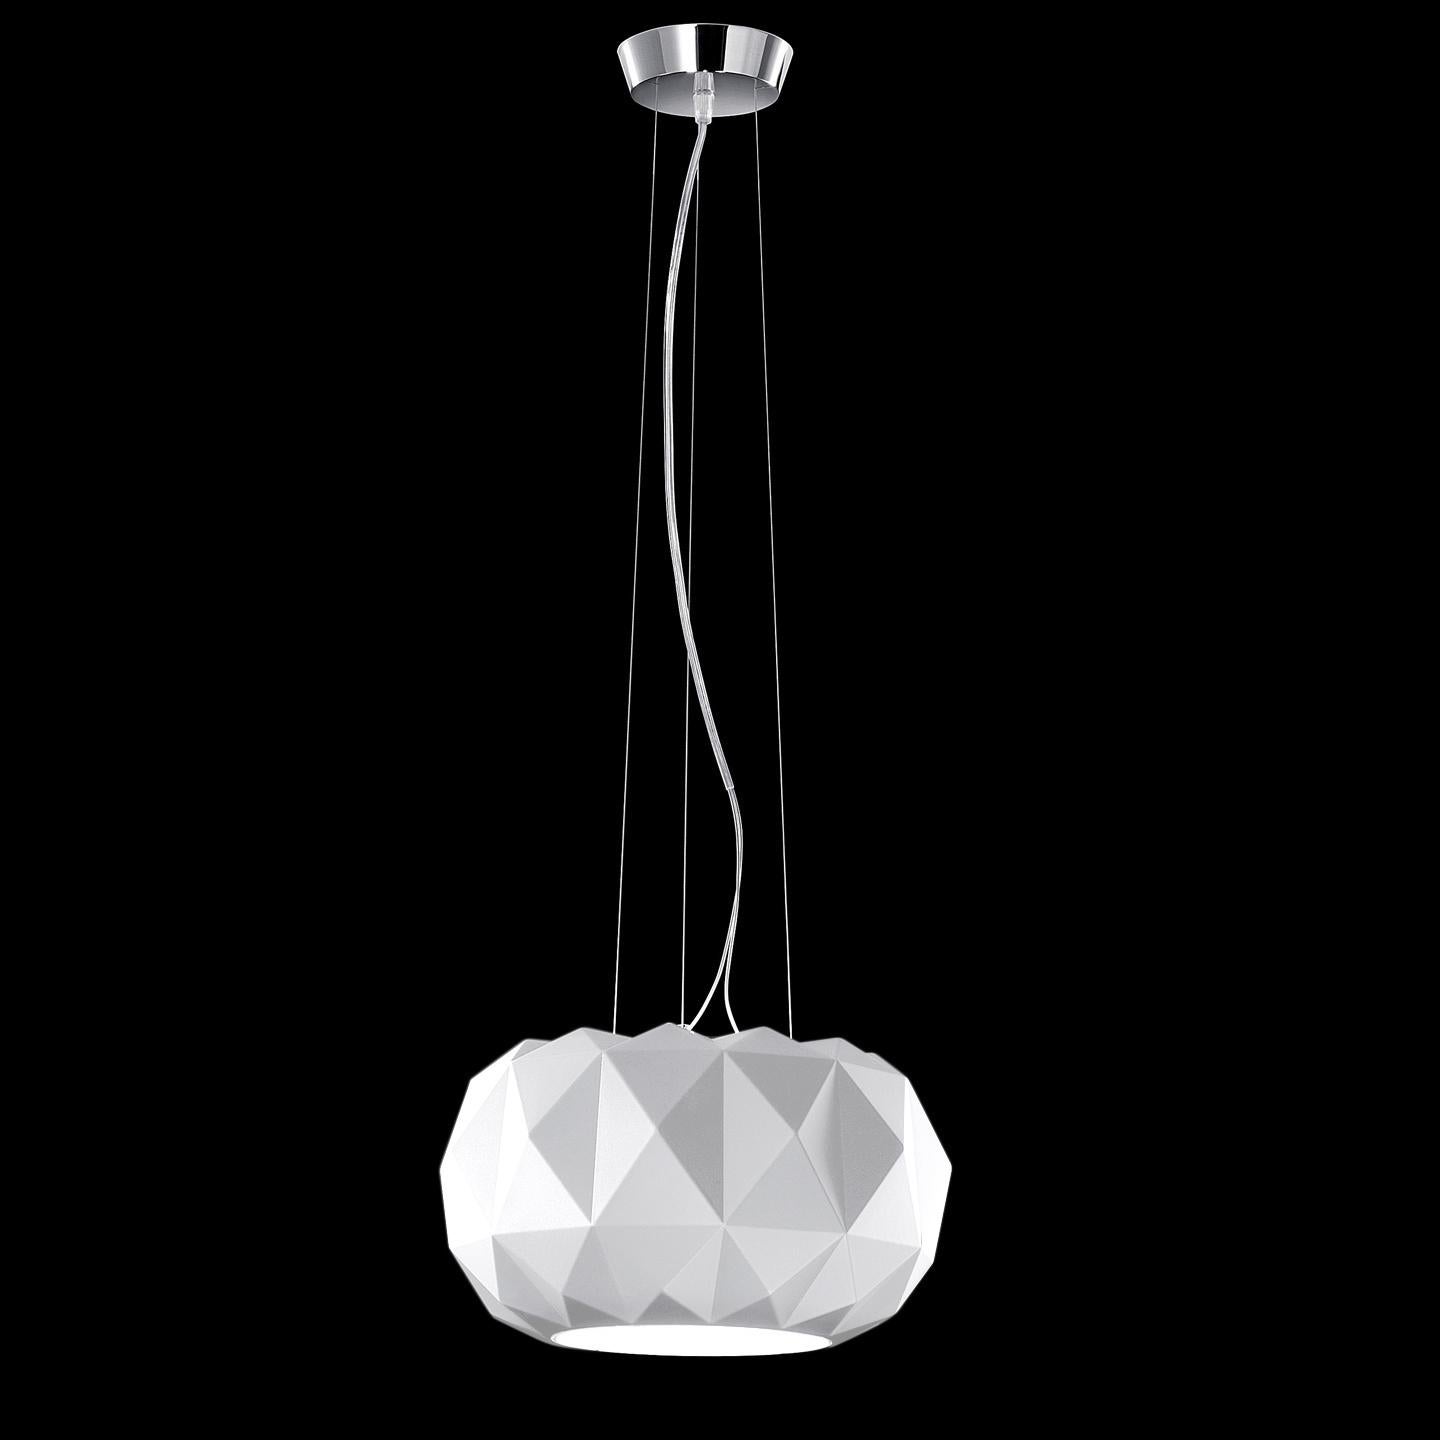 Leucos Deluxe S 35 LED Pendant Light in Satin White and Chrome by Archirivolto